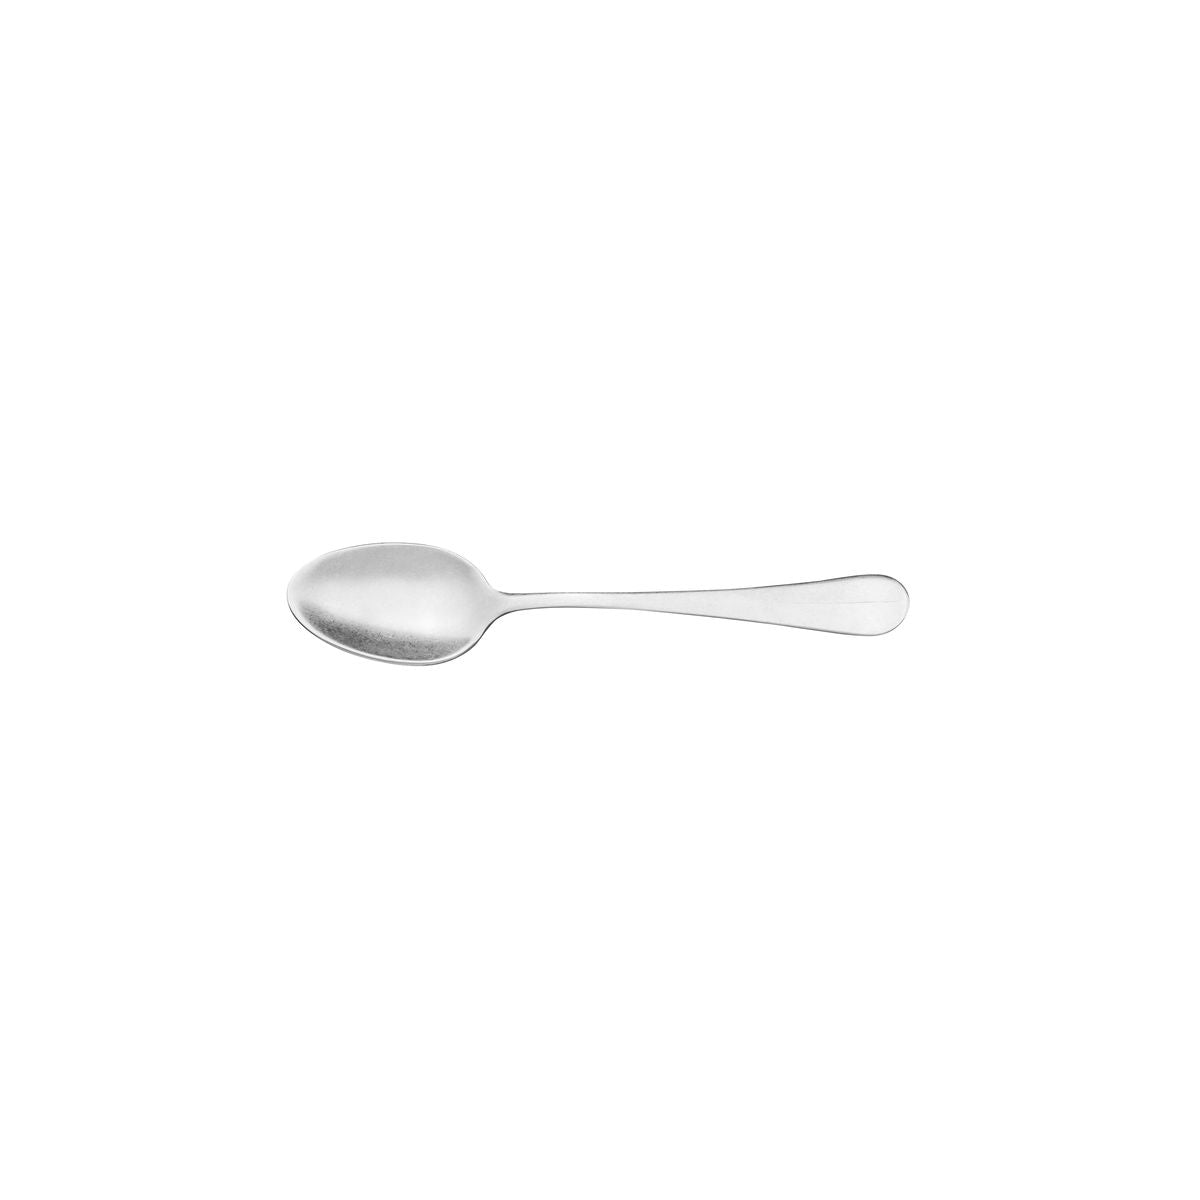 Teaspoon - Vintage Baguette from Abert. Satin Finish, made out of Stainless Steel and sold in boxes of 12. Hospitality quality at wholesale price with The Flying Fork! 